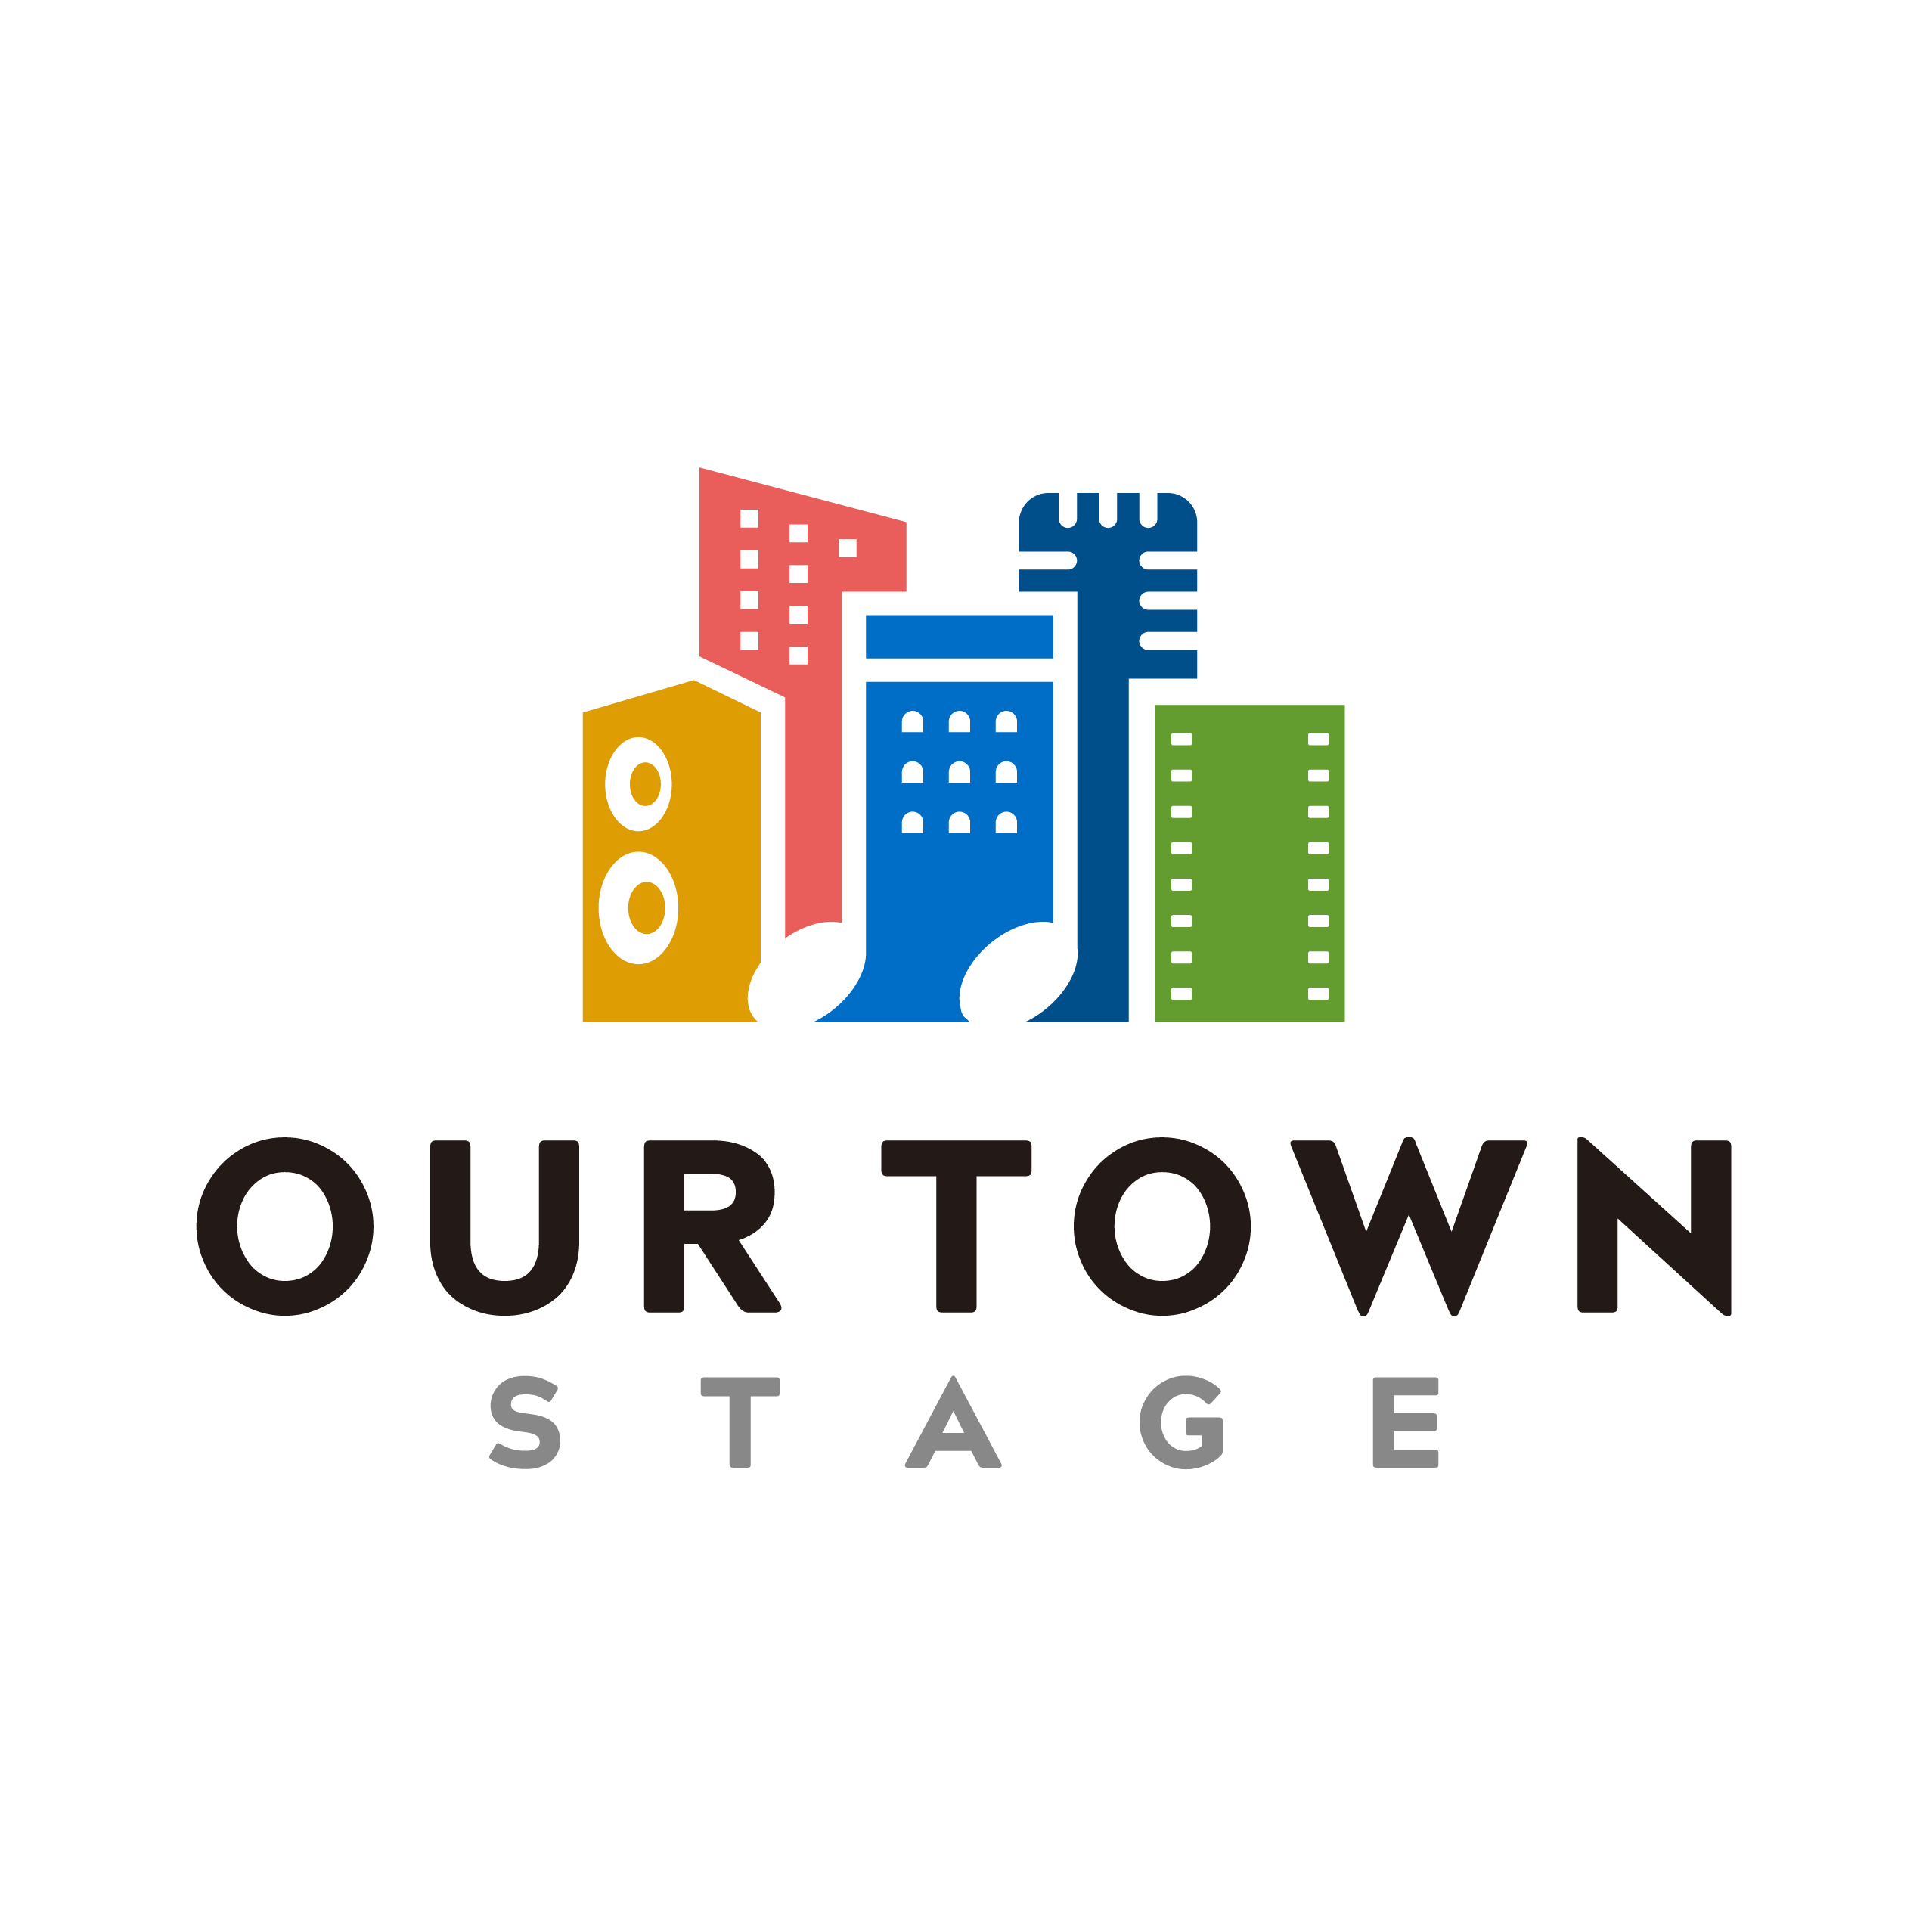 Our Town Stage